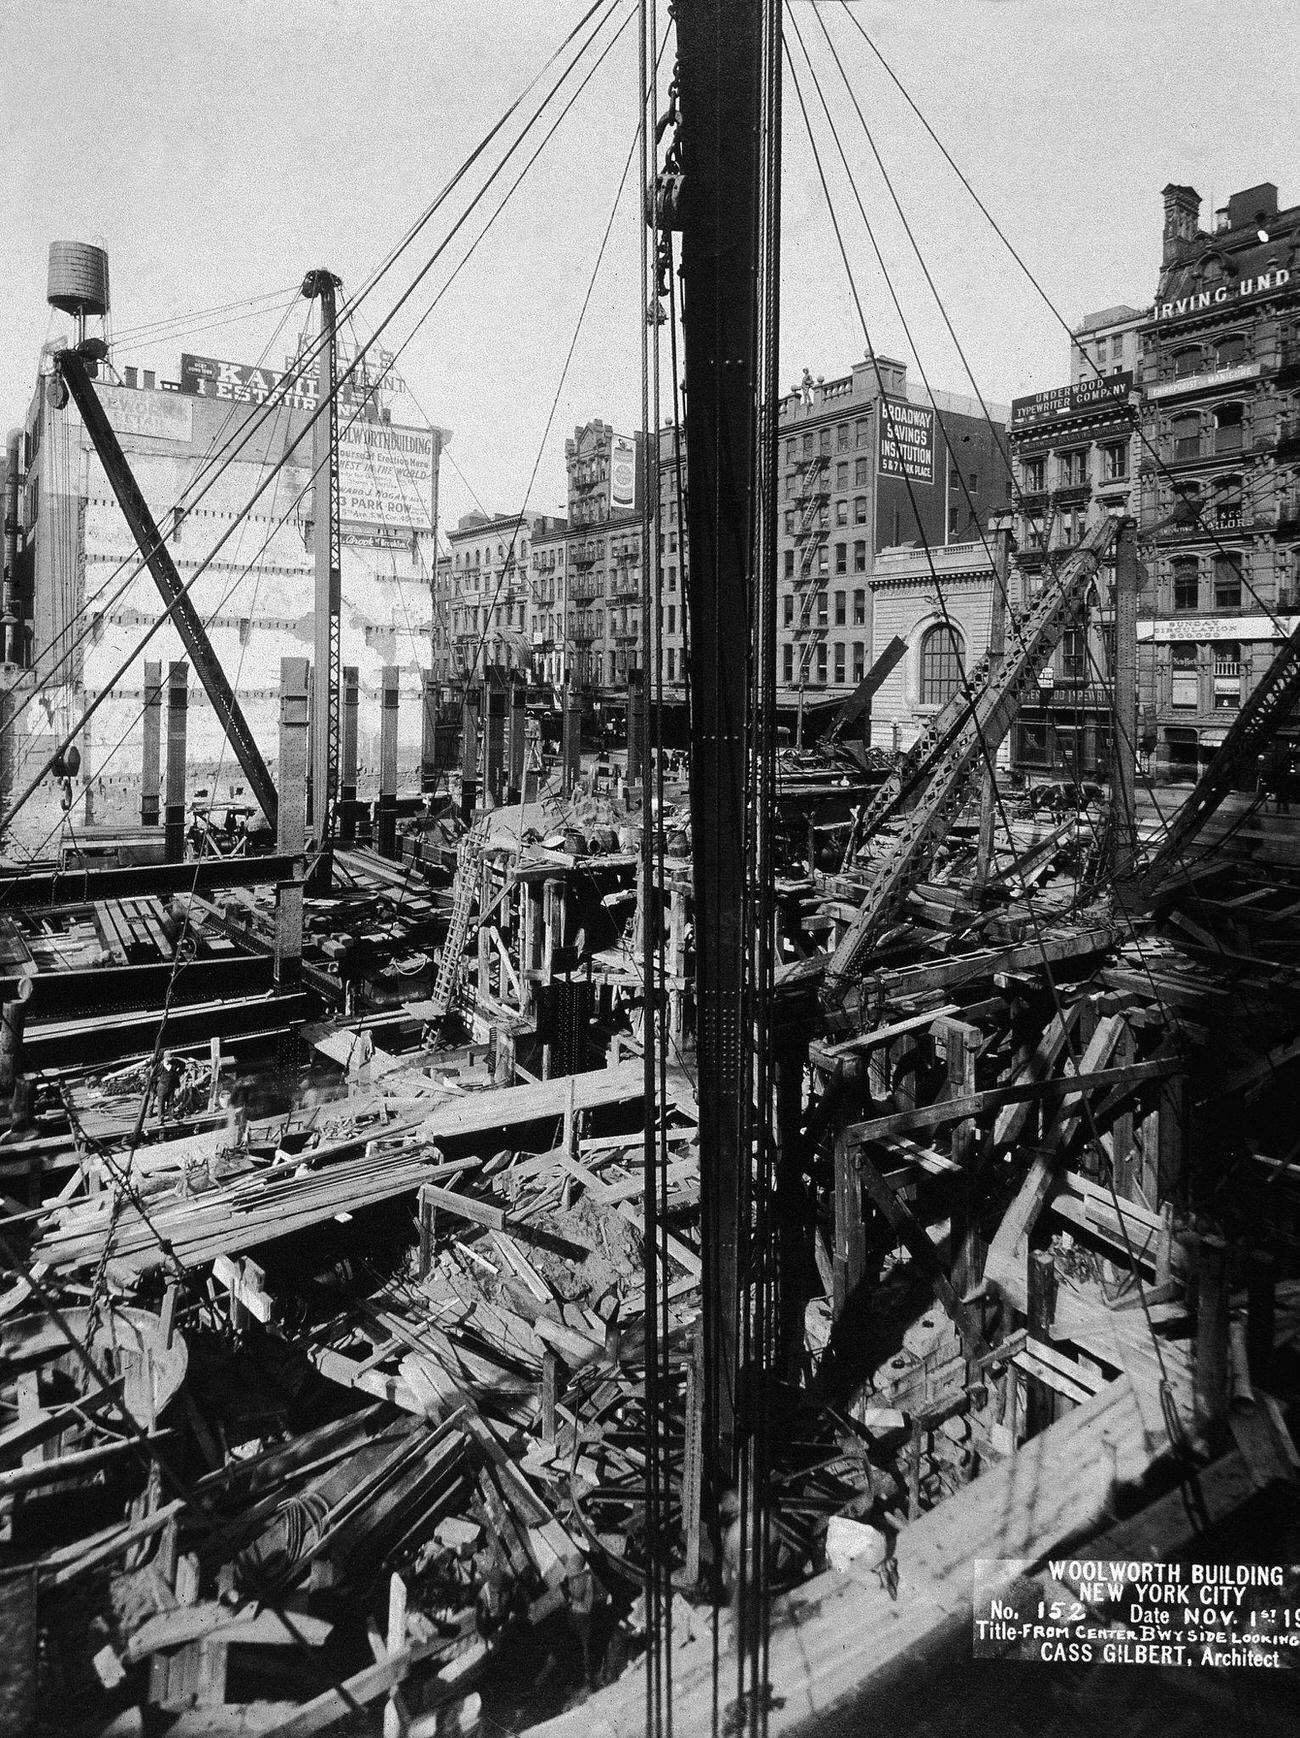 Aerial View Of The Woolworth Building Construction Site From The Center Of The Broadway Side, 1911